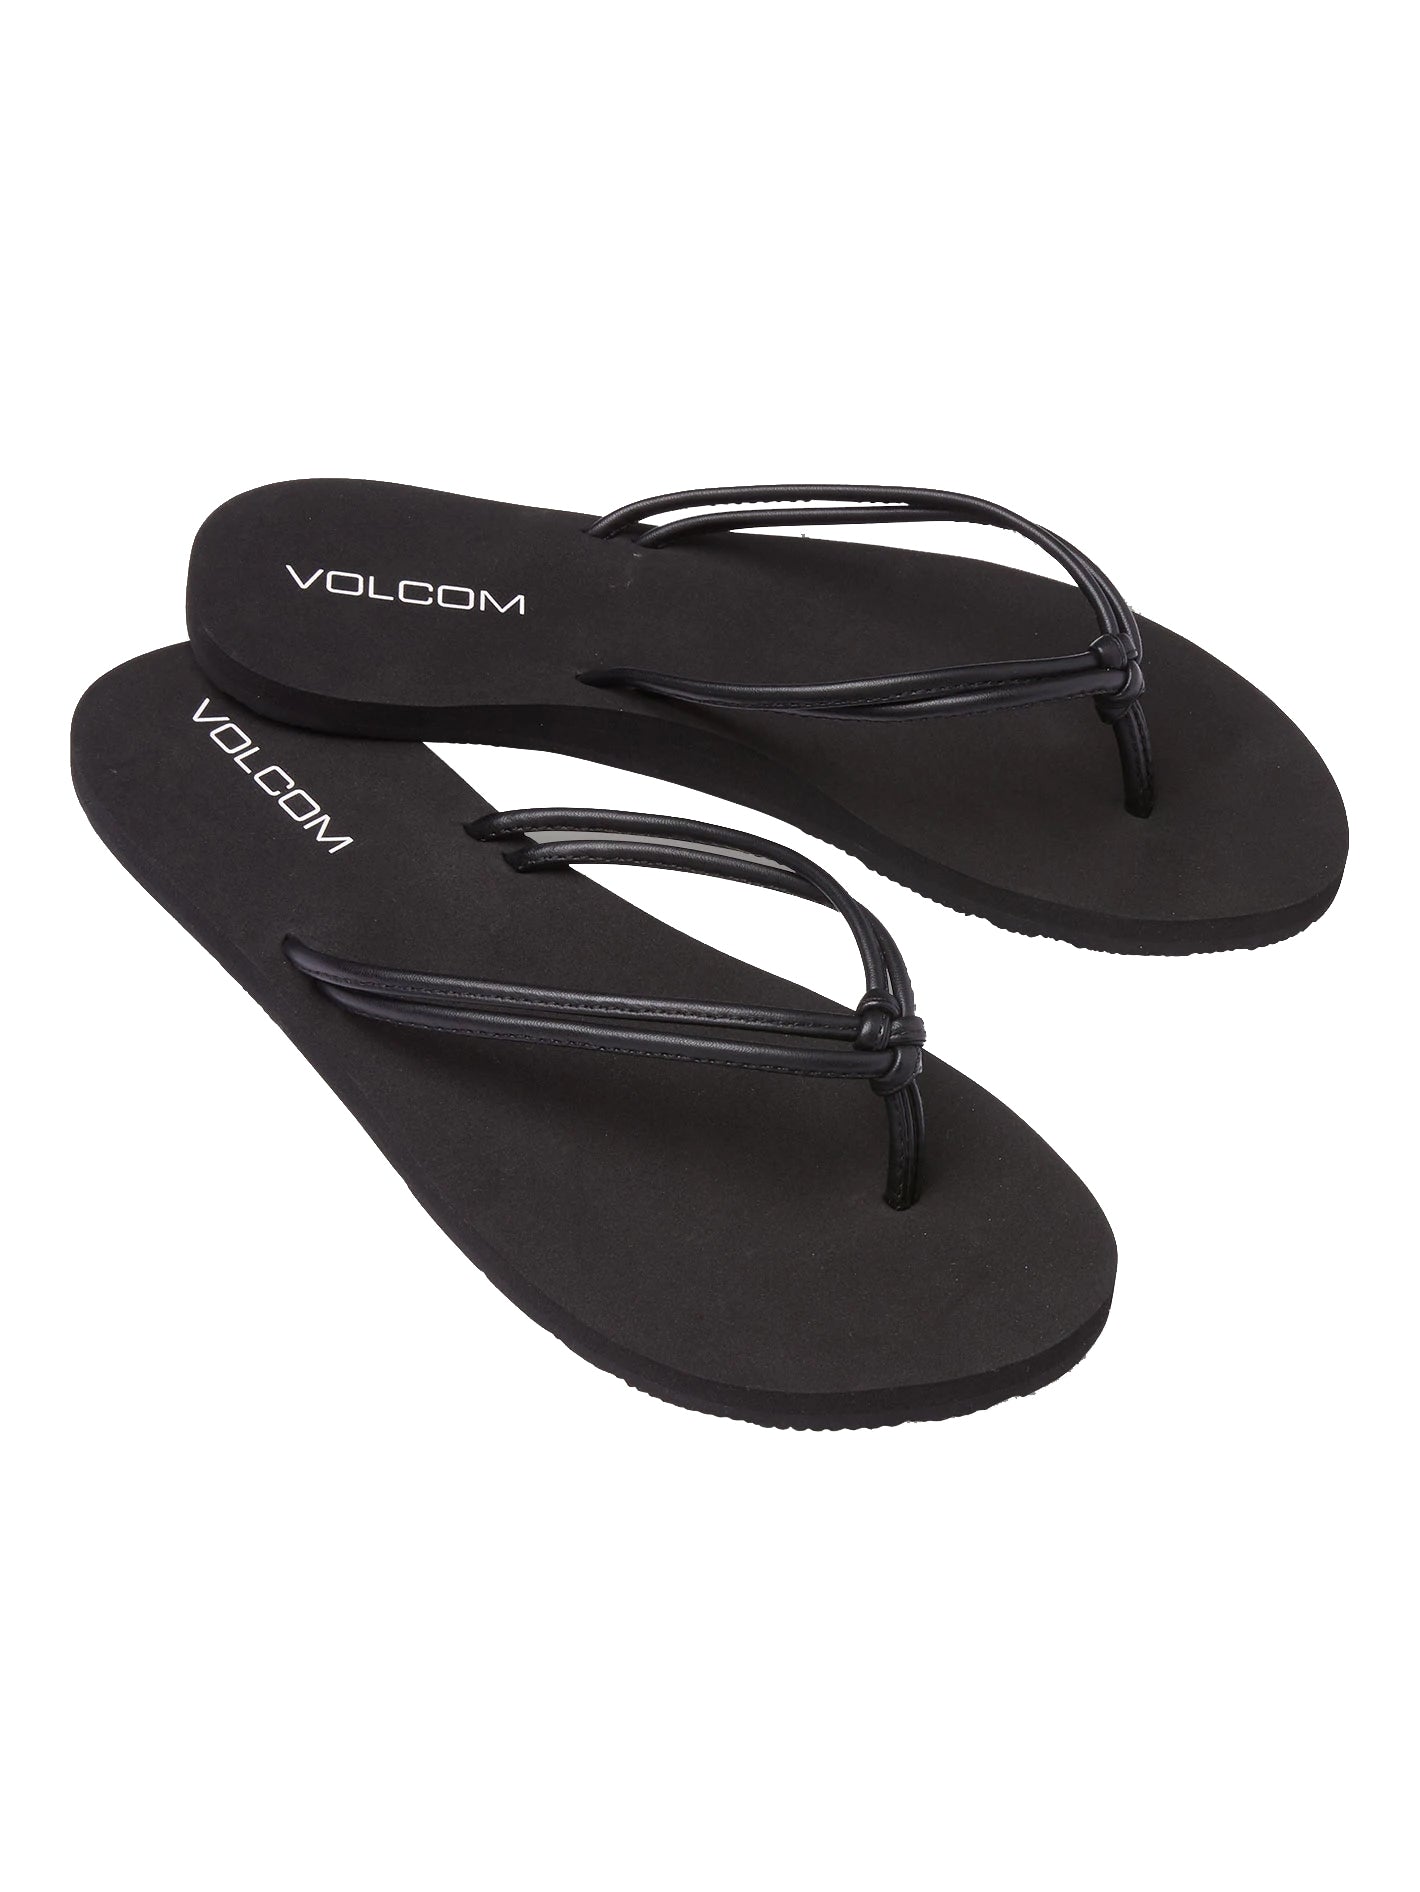 Volcom Forever and Ever 2 Womens Sandal BKO-Black Out 8